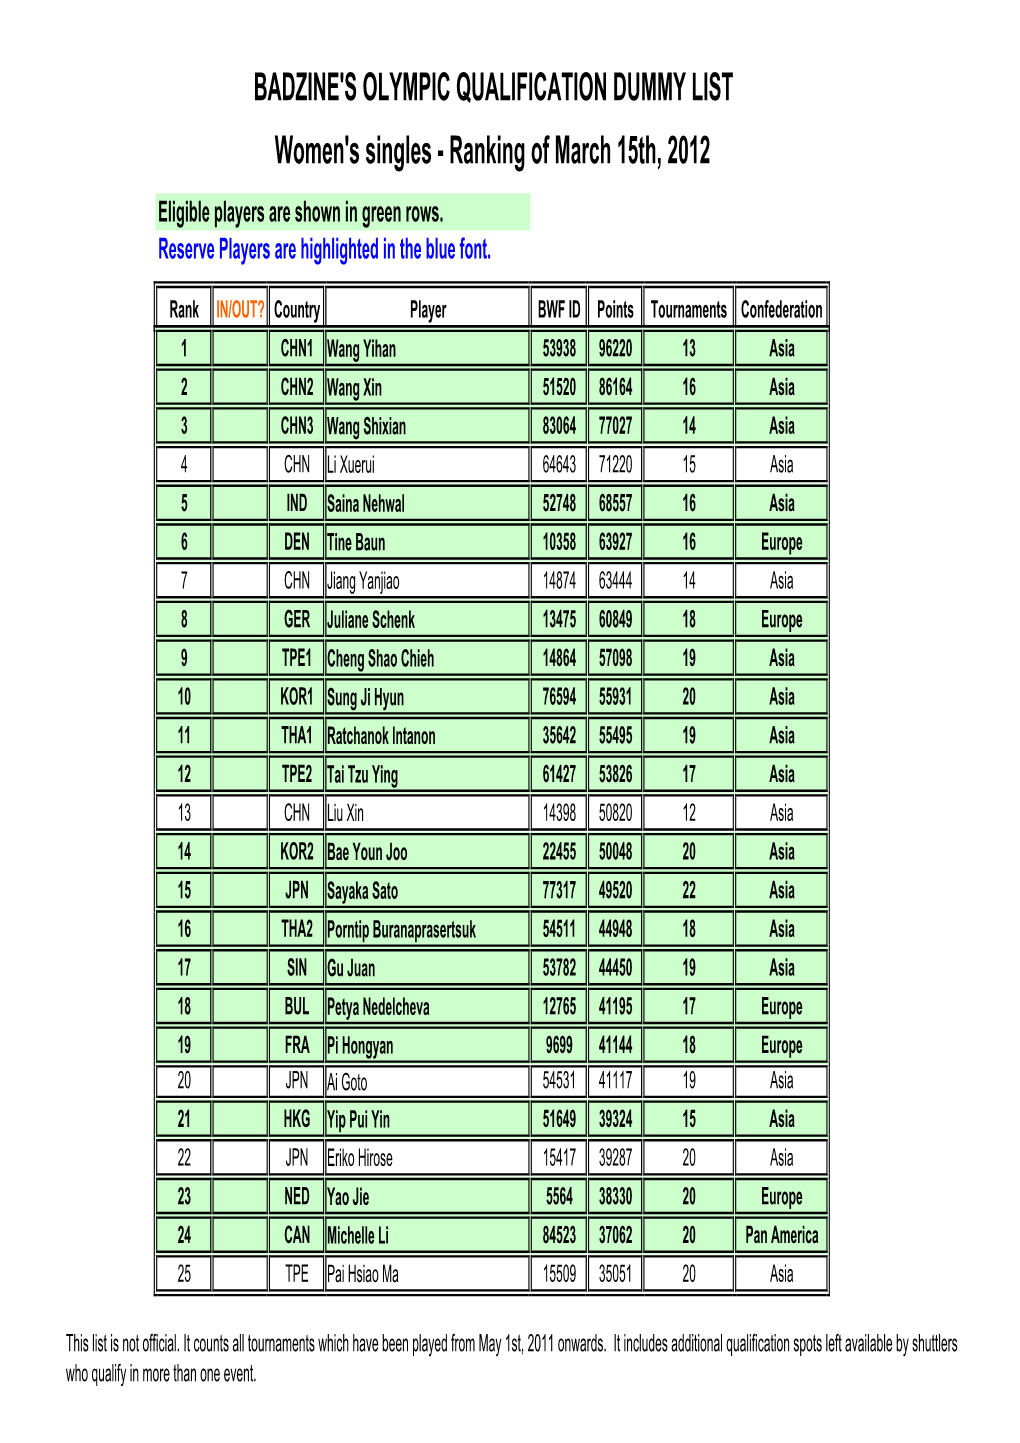 Women's Singles - Ranking of March 15Th, 2012 Eligible Players Are Shown in Green Rows